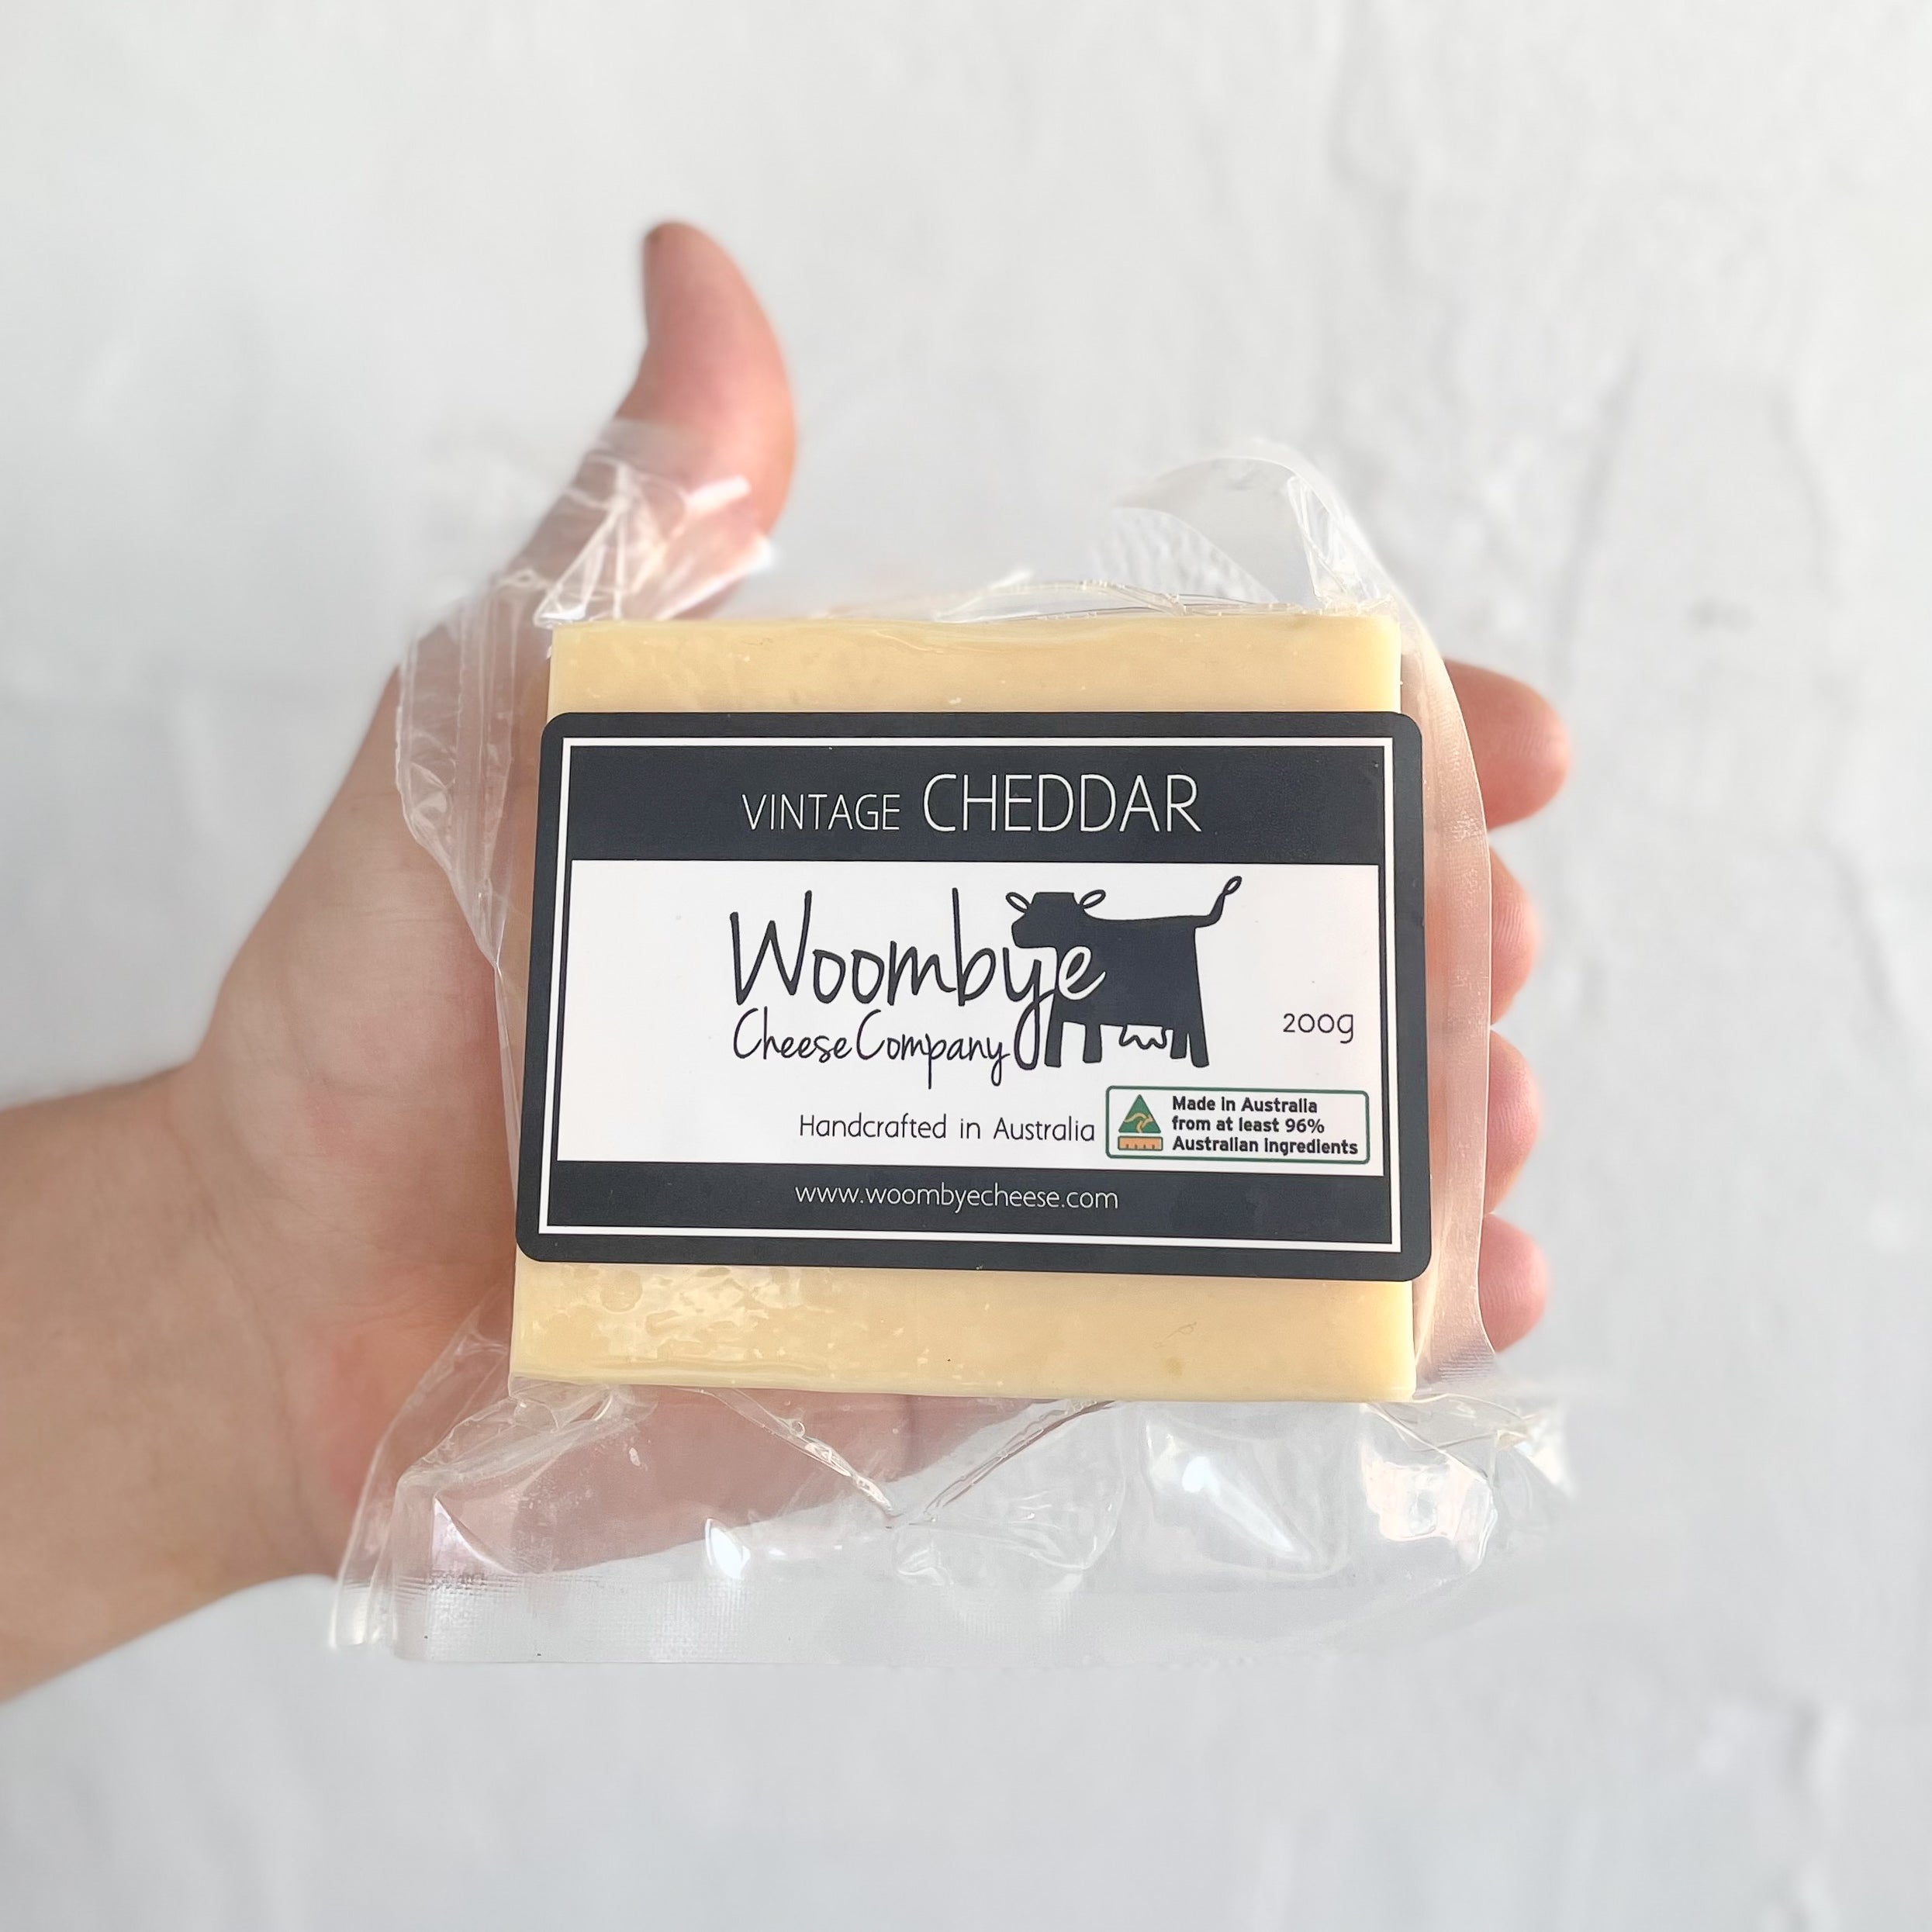 Woombye Cheese Company Vintage Cheddar 200g